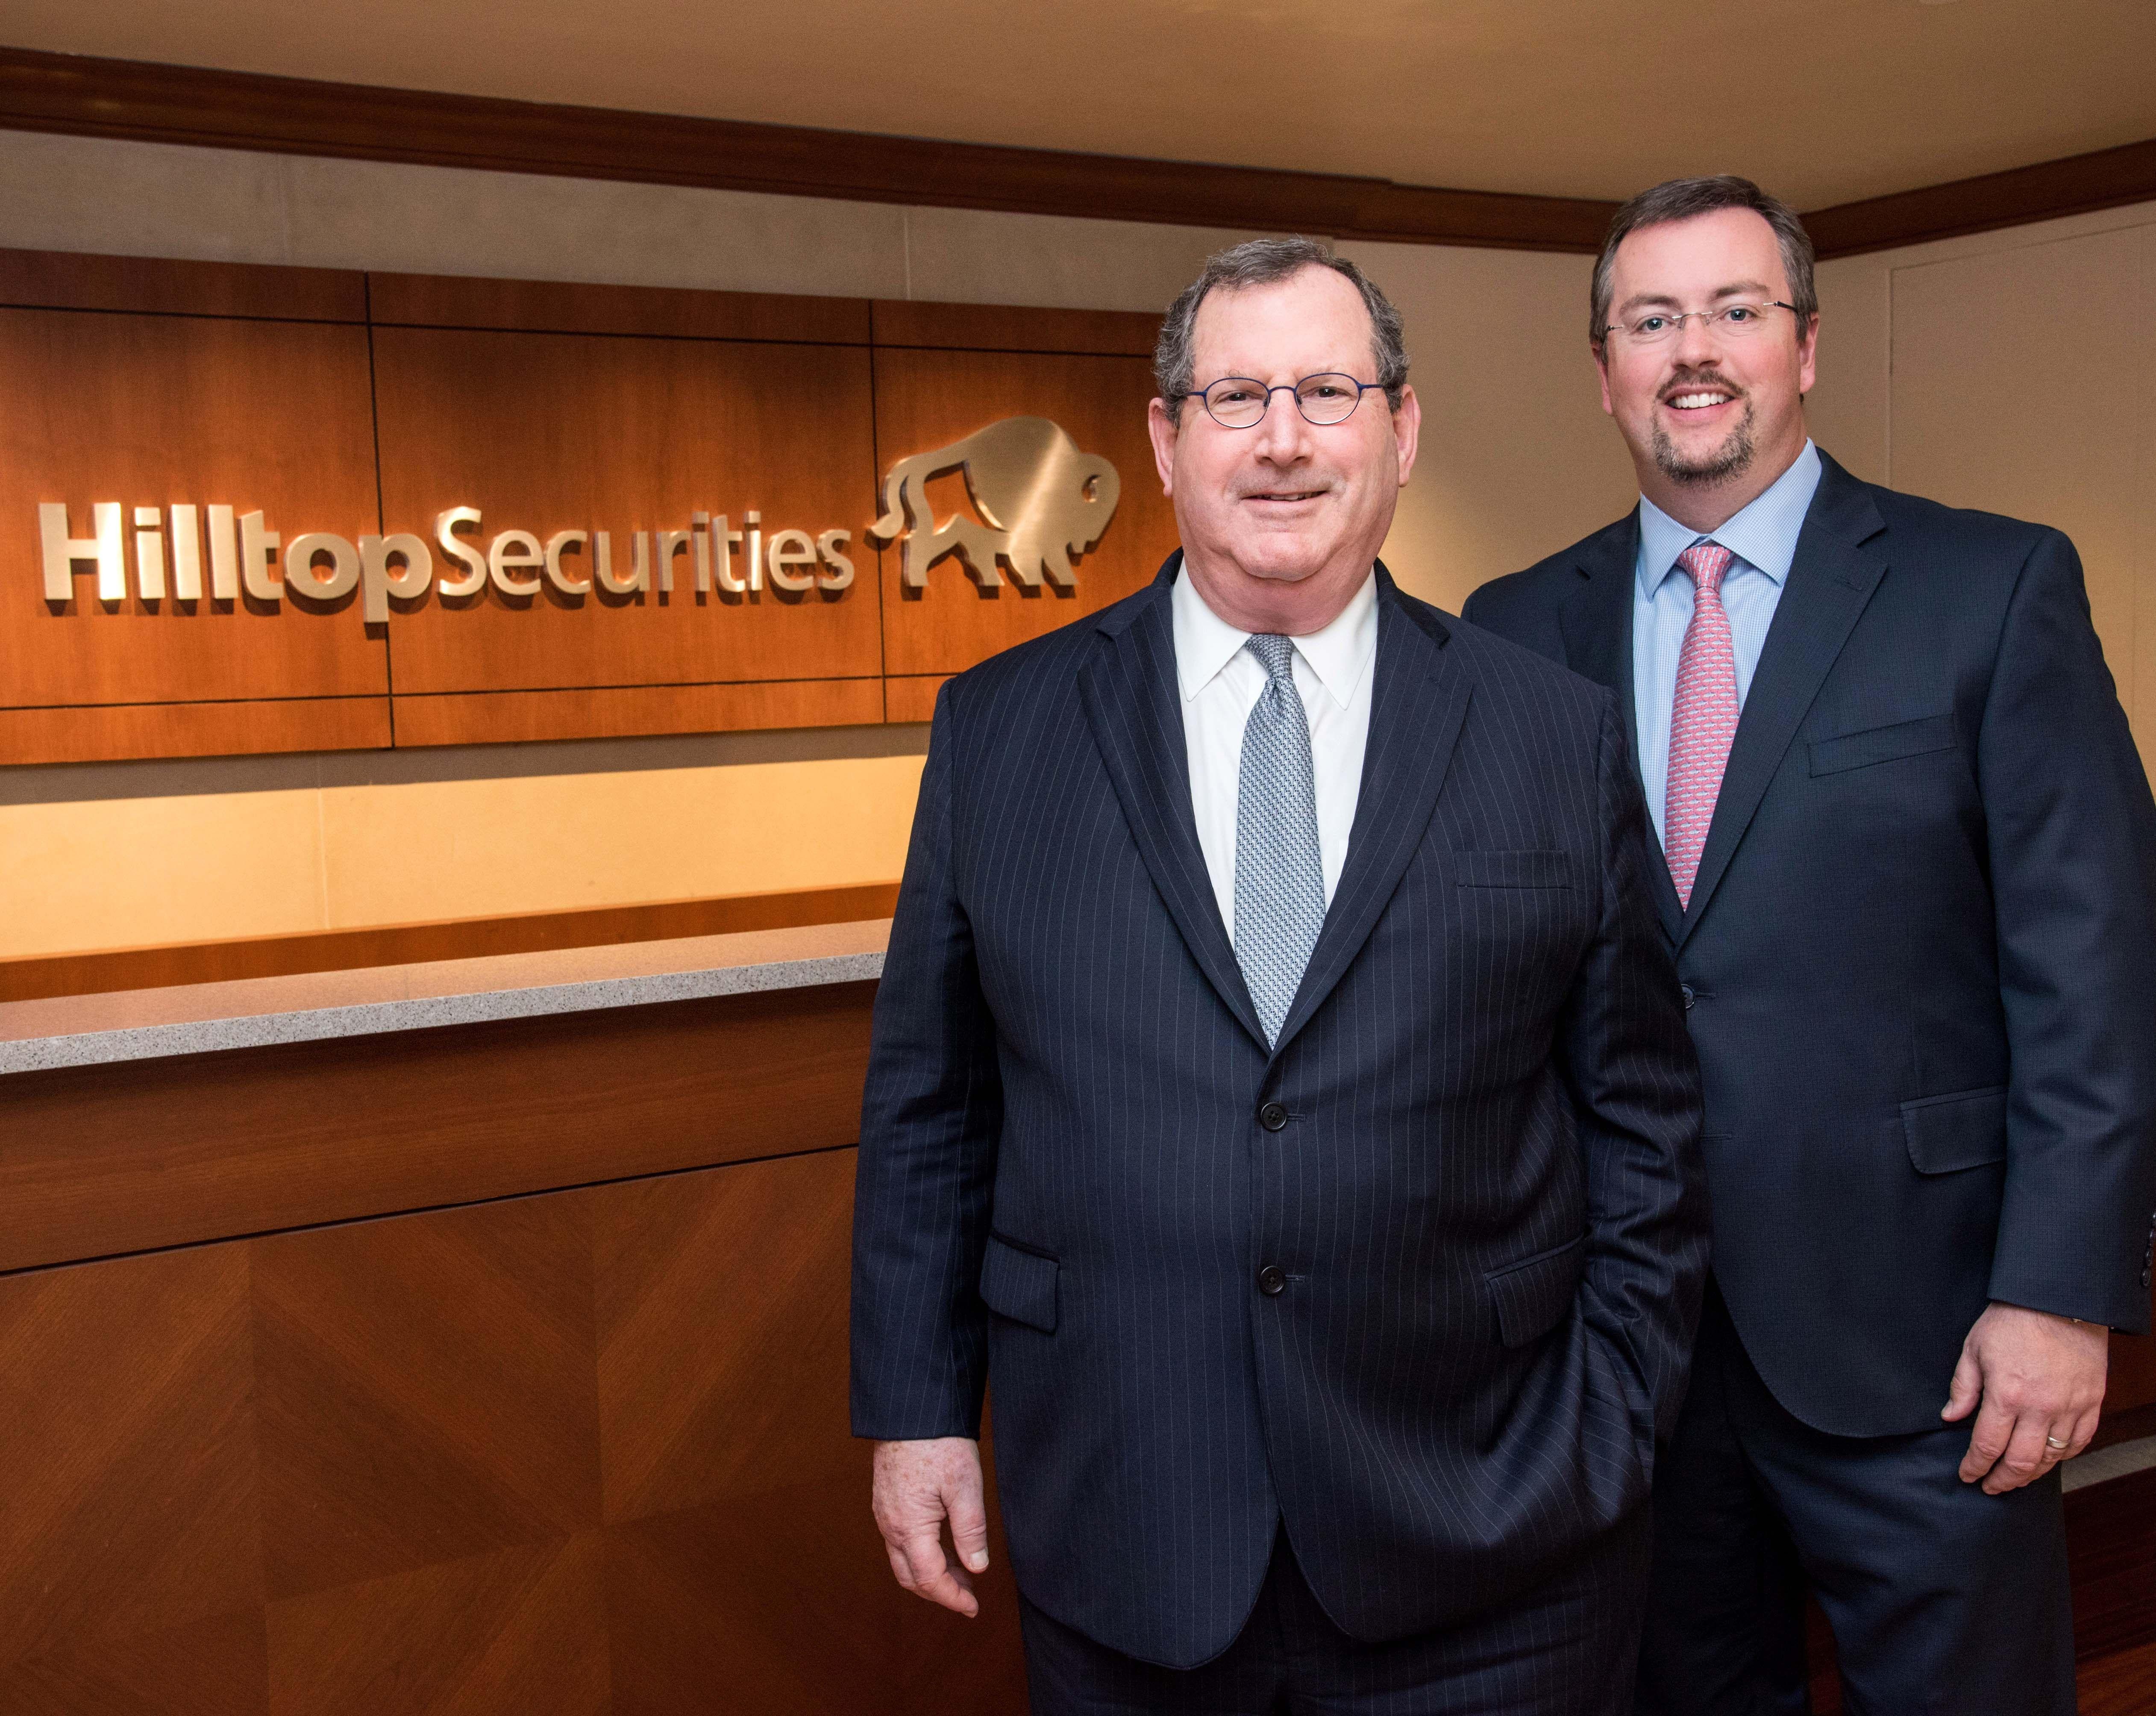 South West Securities Logo - Hilltop Holdings Completes Merger of FirstSouthwest and Southwest ...